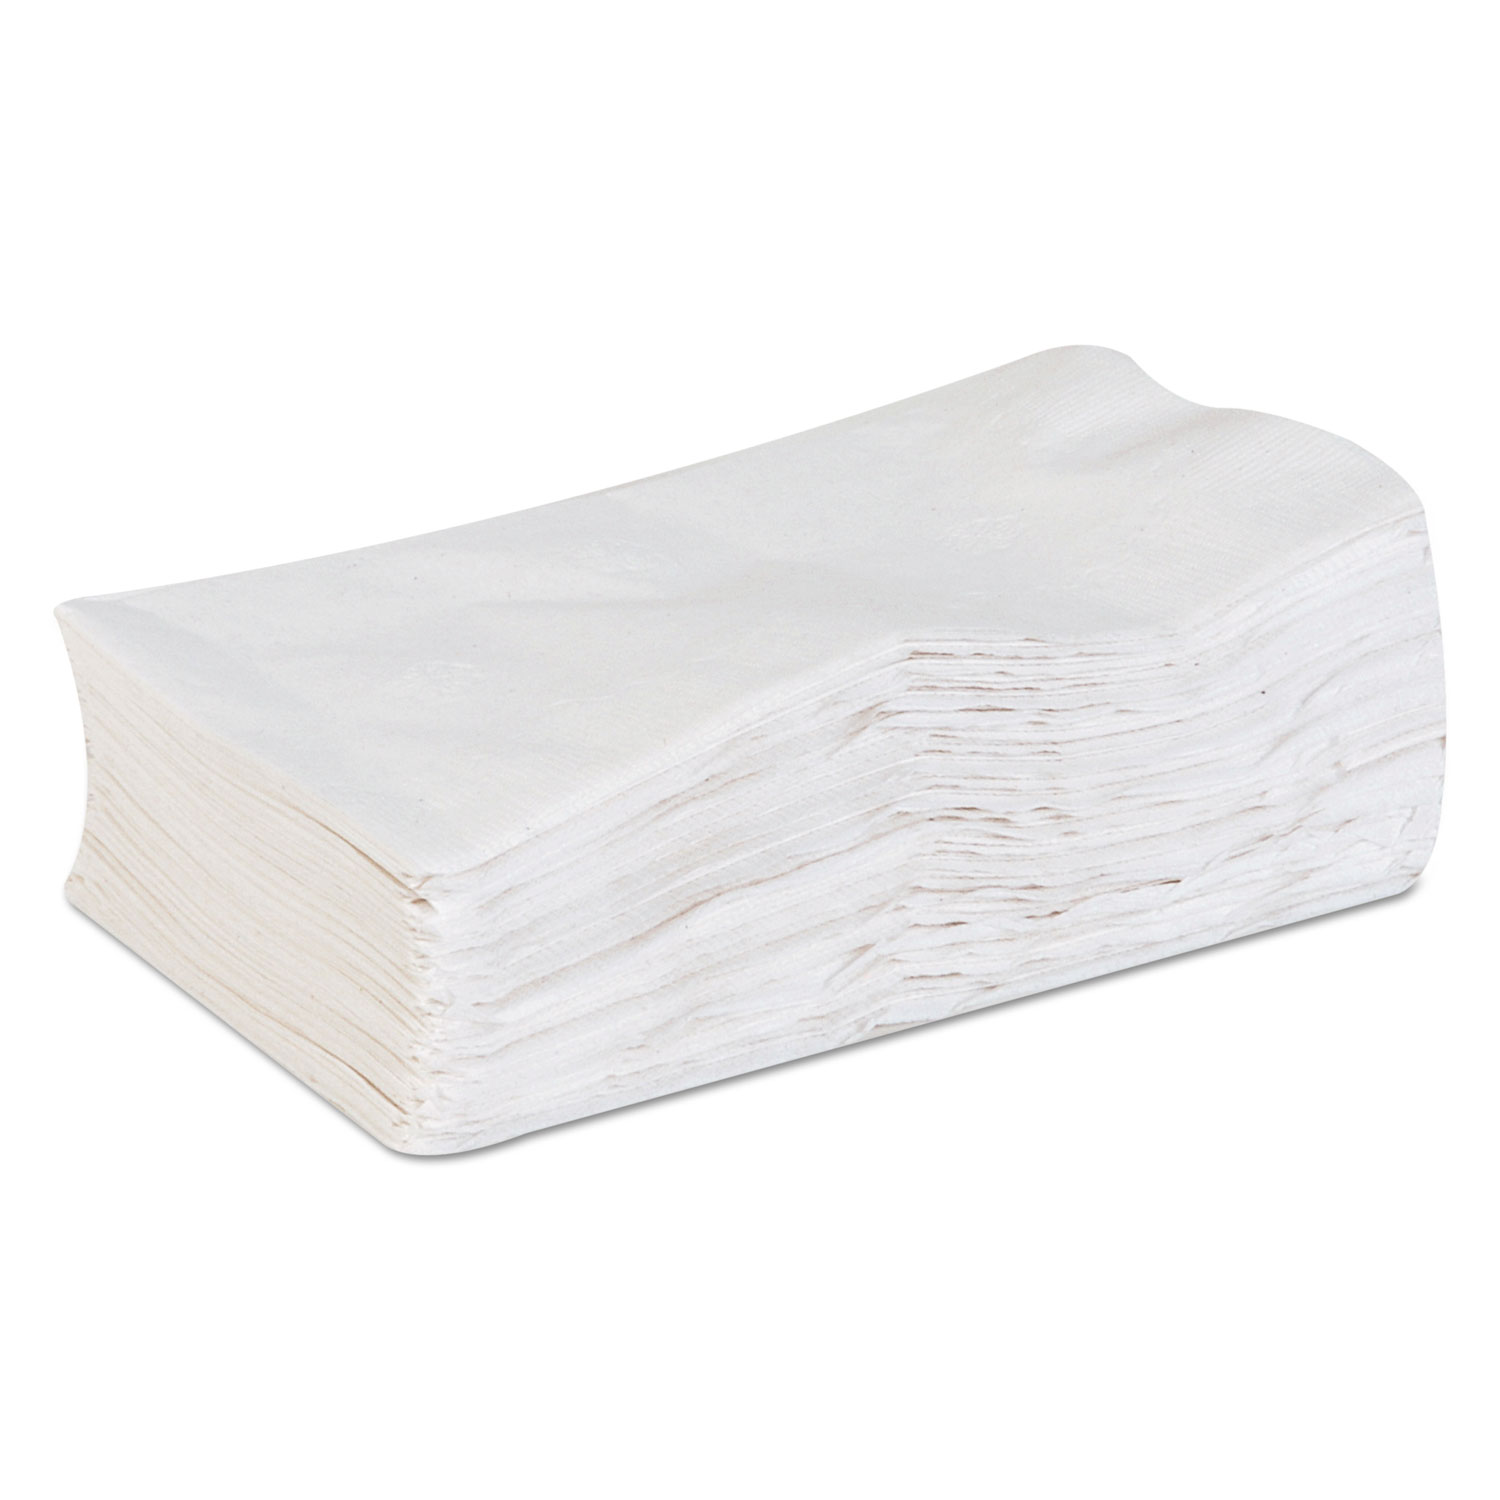  Georgia Pacific Professional 31577 acclaim Dinner Napkins, 1-Ply, White, 15 x 17, 200/Pack, 16 Pack/Carton (GPC31577) 